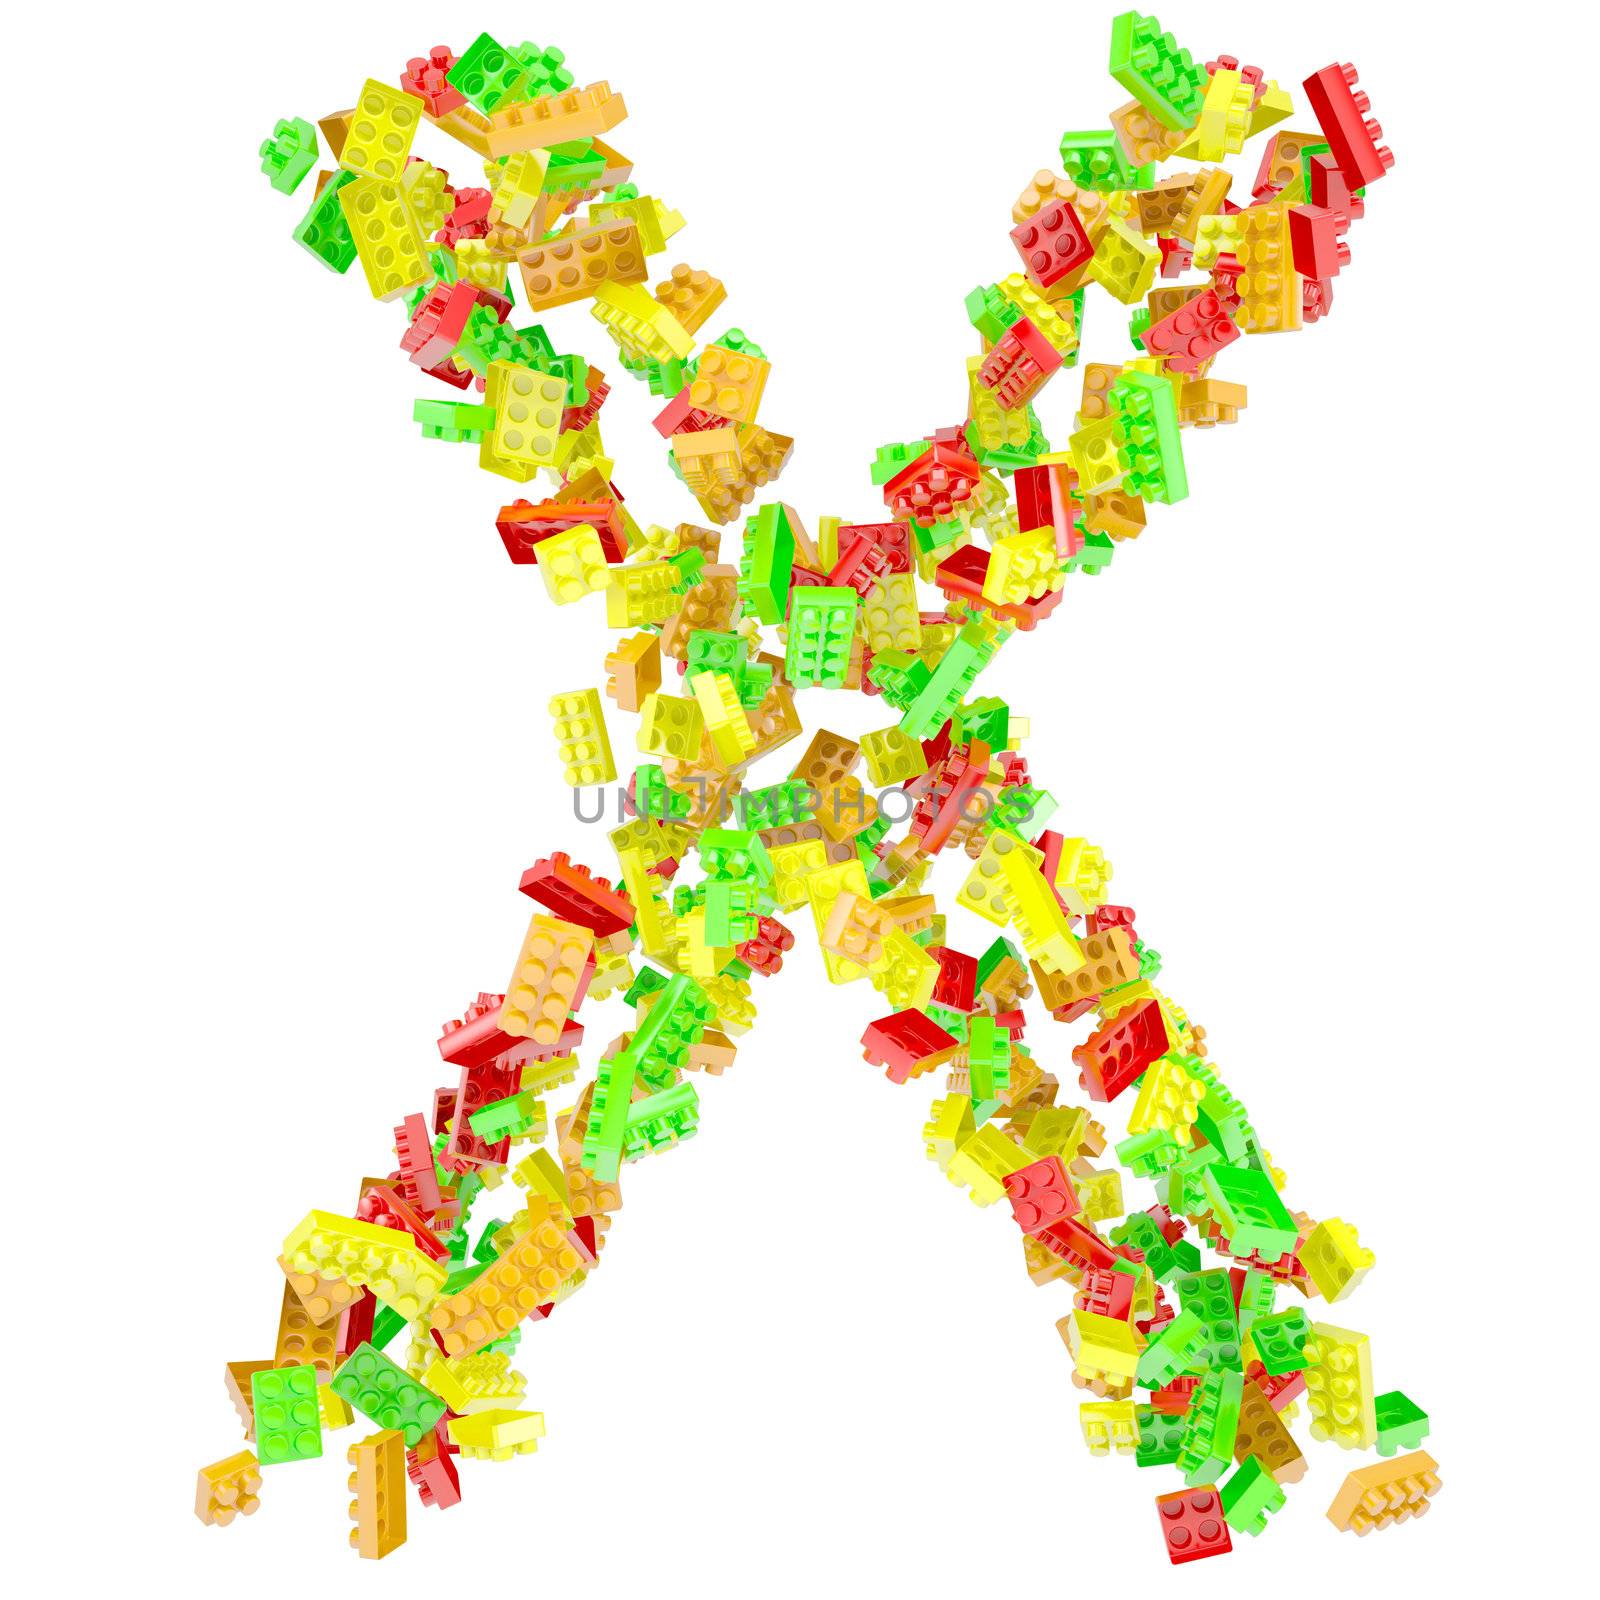 The letter X is made up of children's blocks by cherezoff